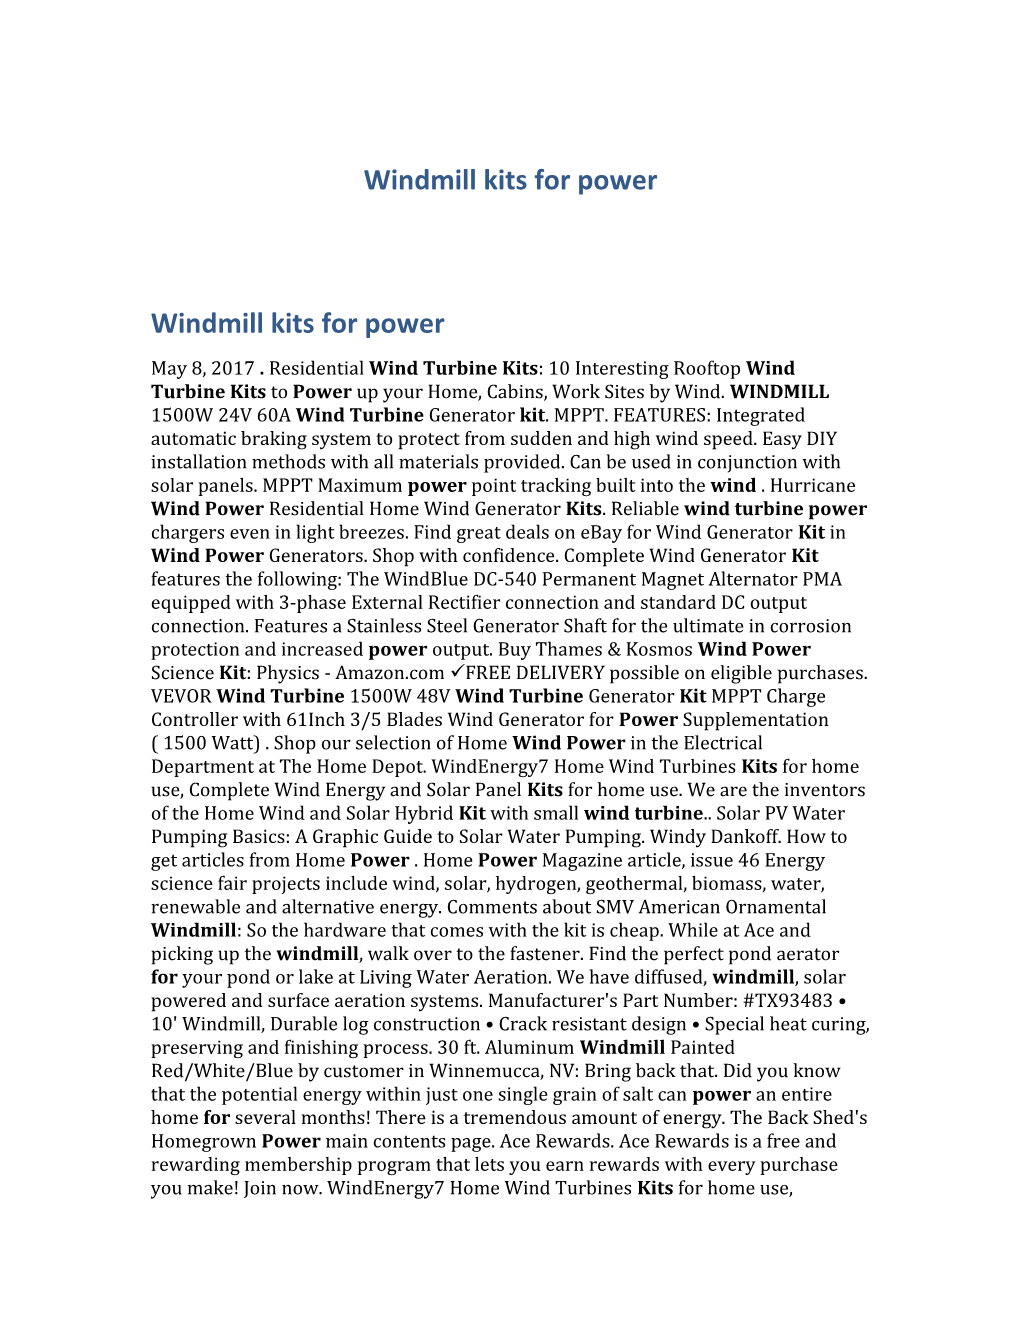 Windmill Kits for Power